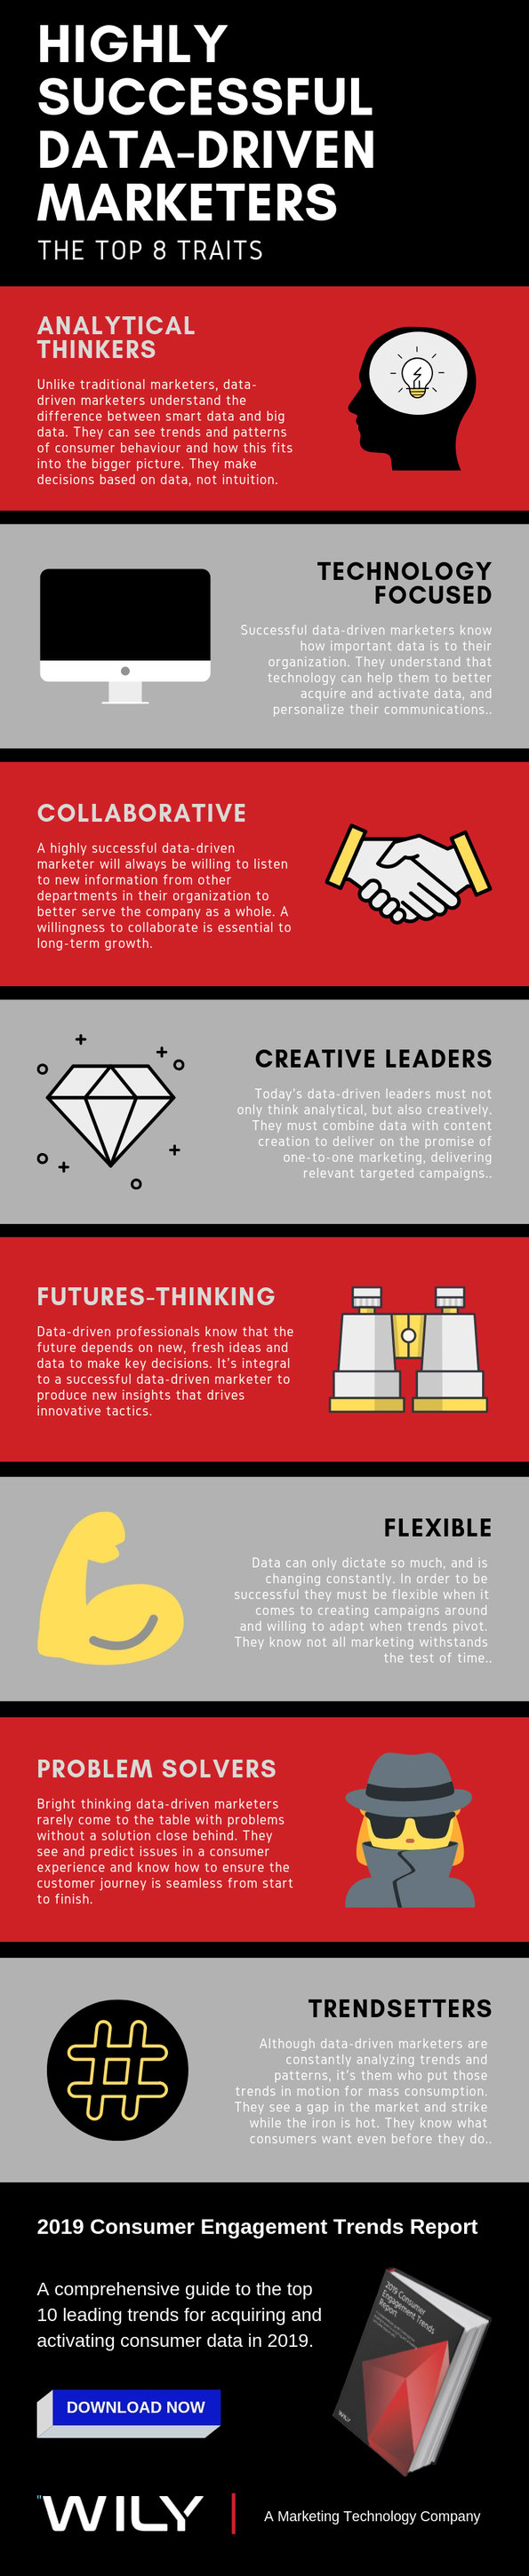 infographic-successful-data-driven-marketer-top-8-traits